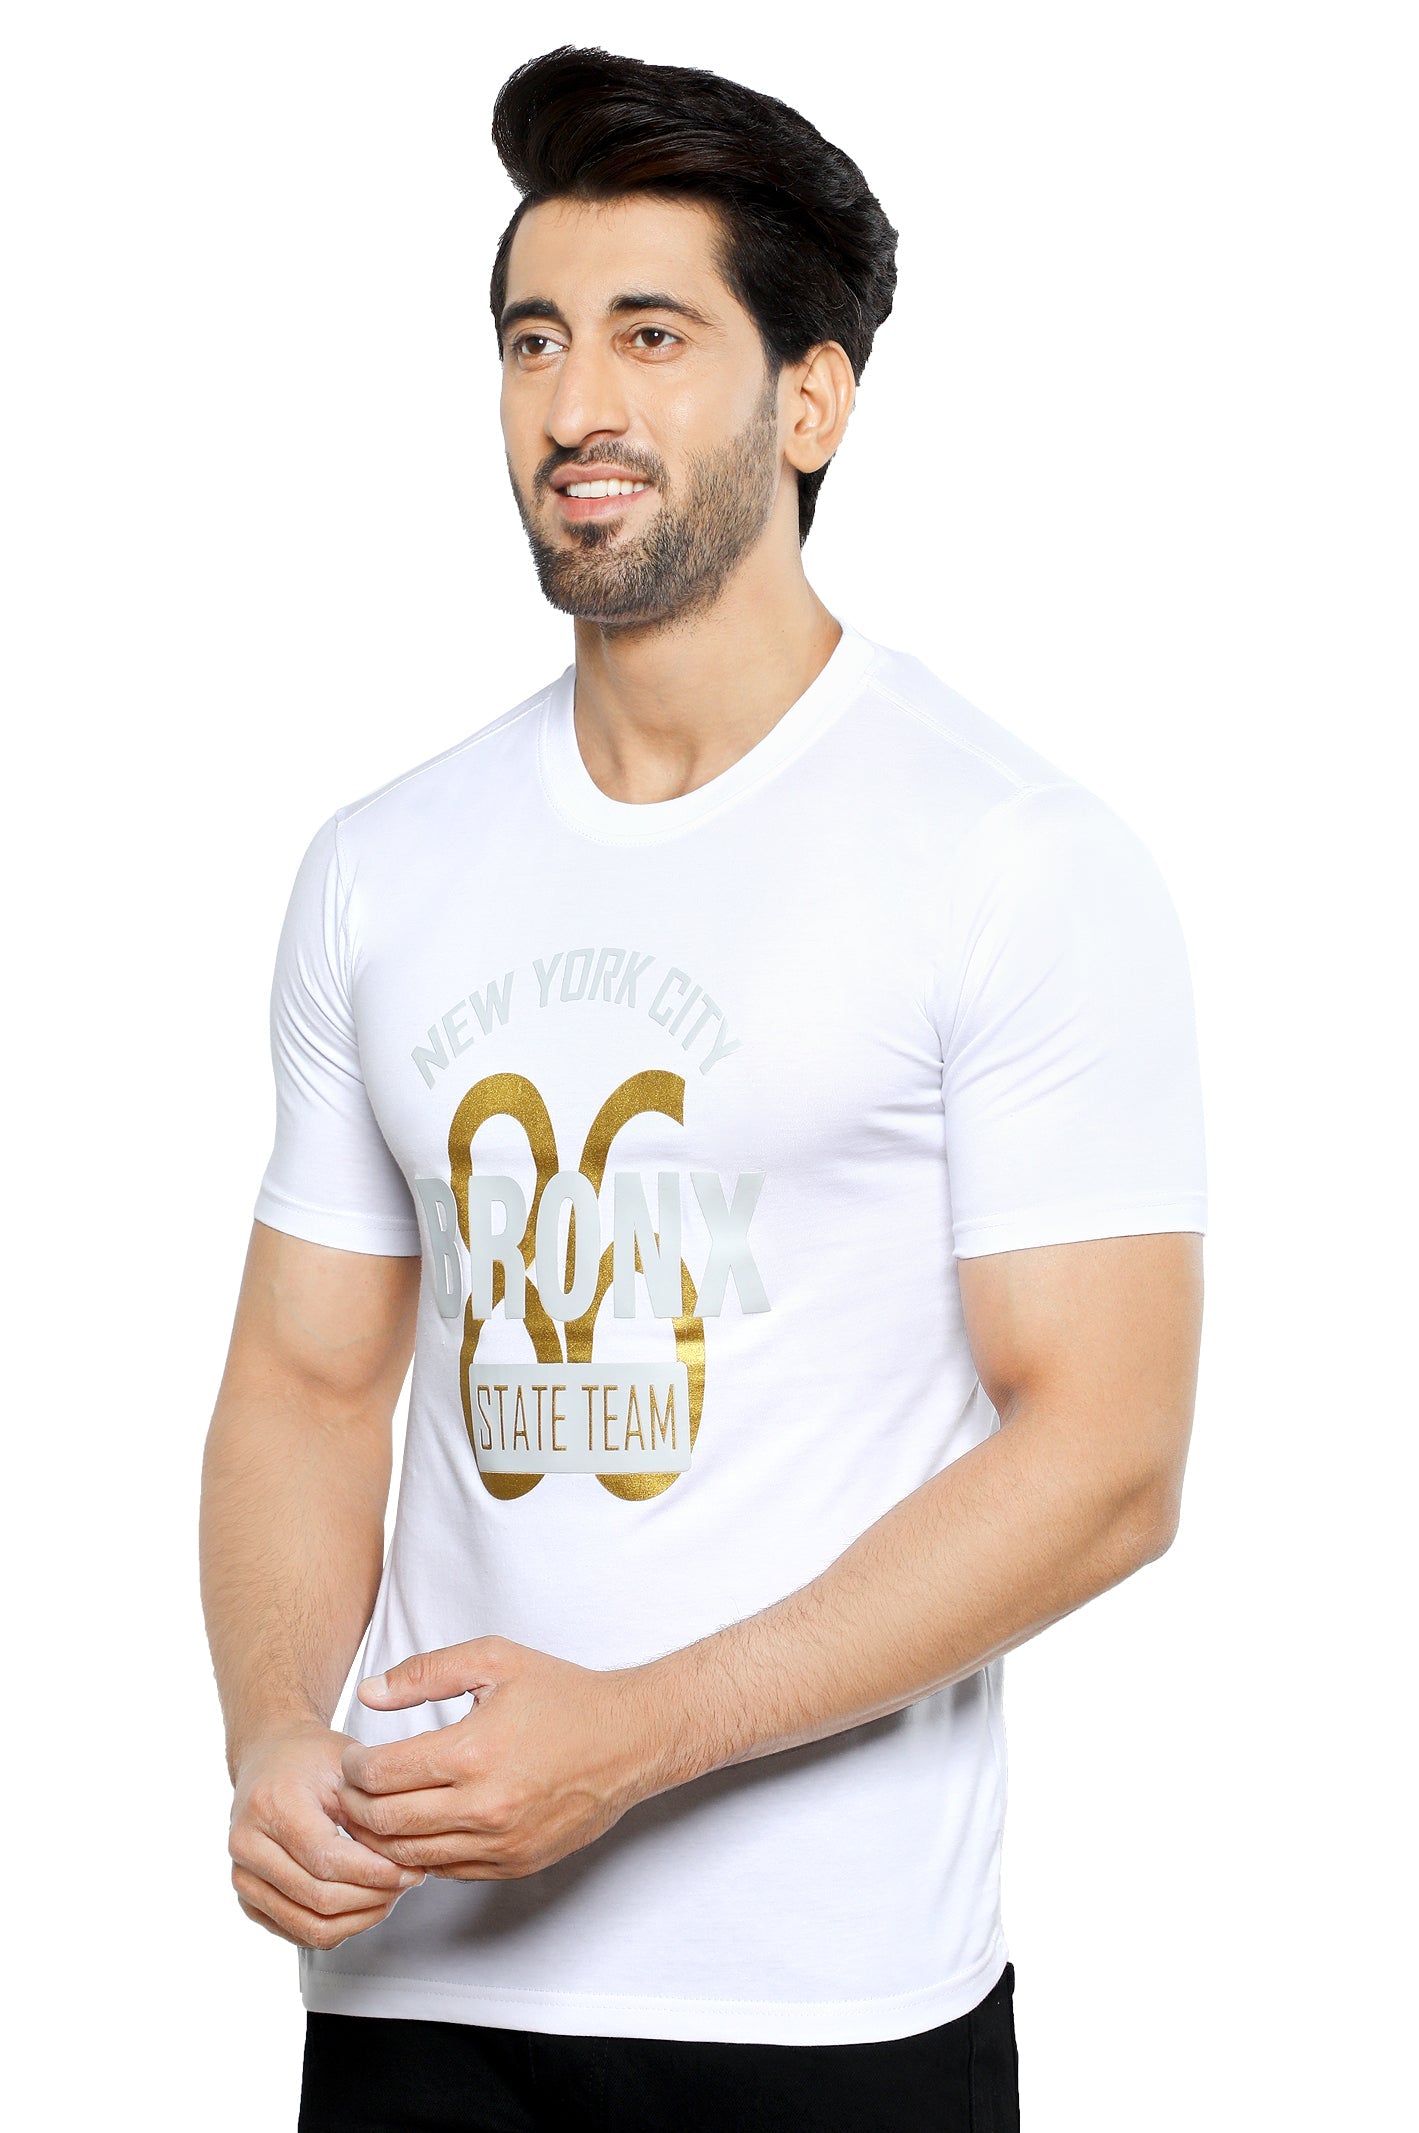 Diners Men's Round Neck T-Shirt SKU: NA799-WHITE - Diners